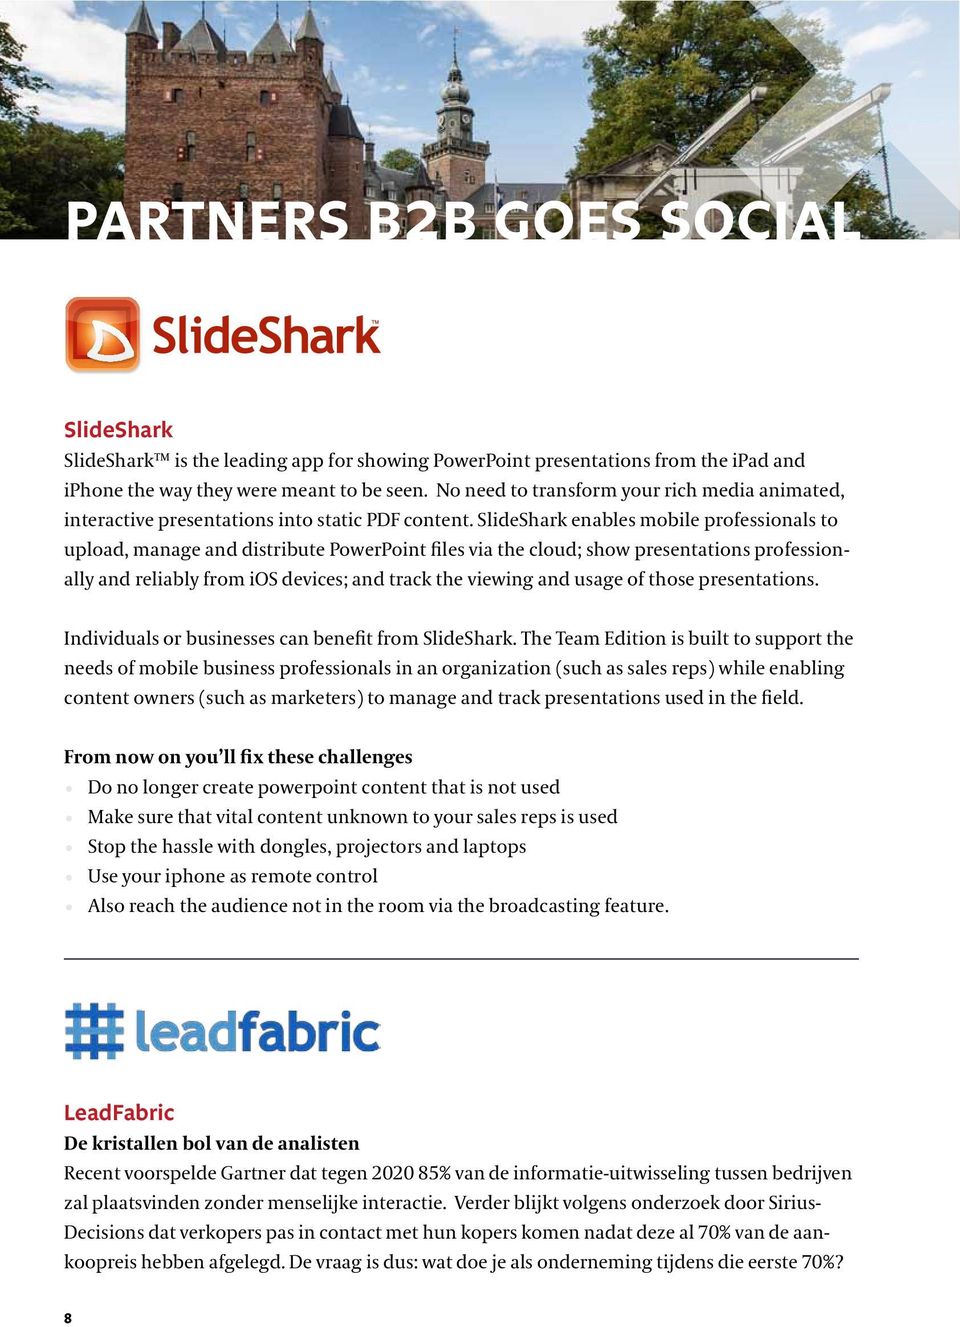 SlideShark enables mobile professionals to upload, manage and distribute PowerPoint files via the cloud; show presentations professionally and reliably from ios devices; and track the viewing and